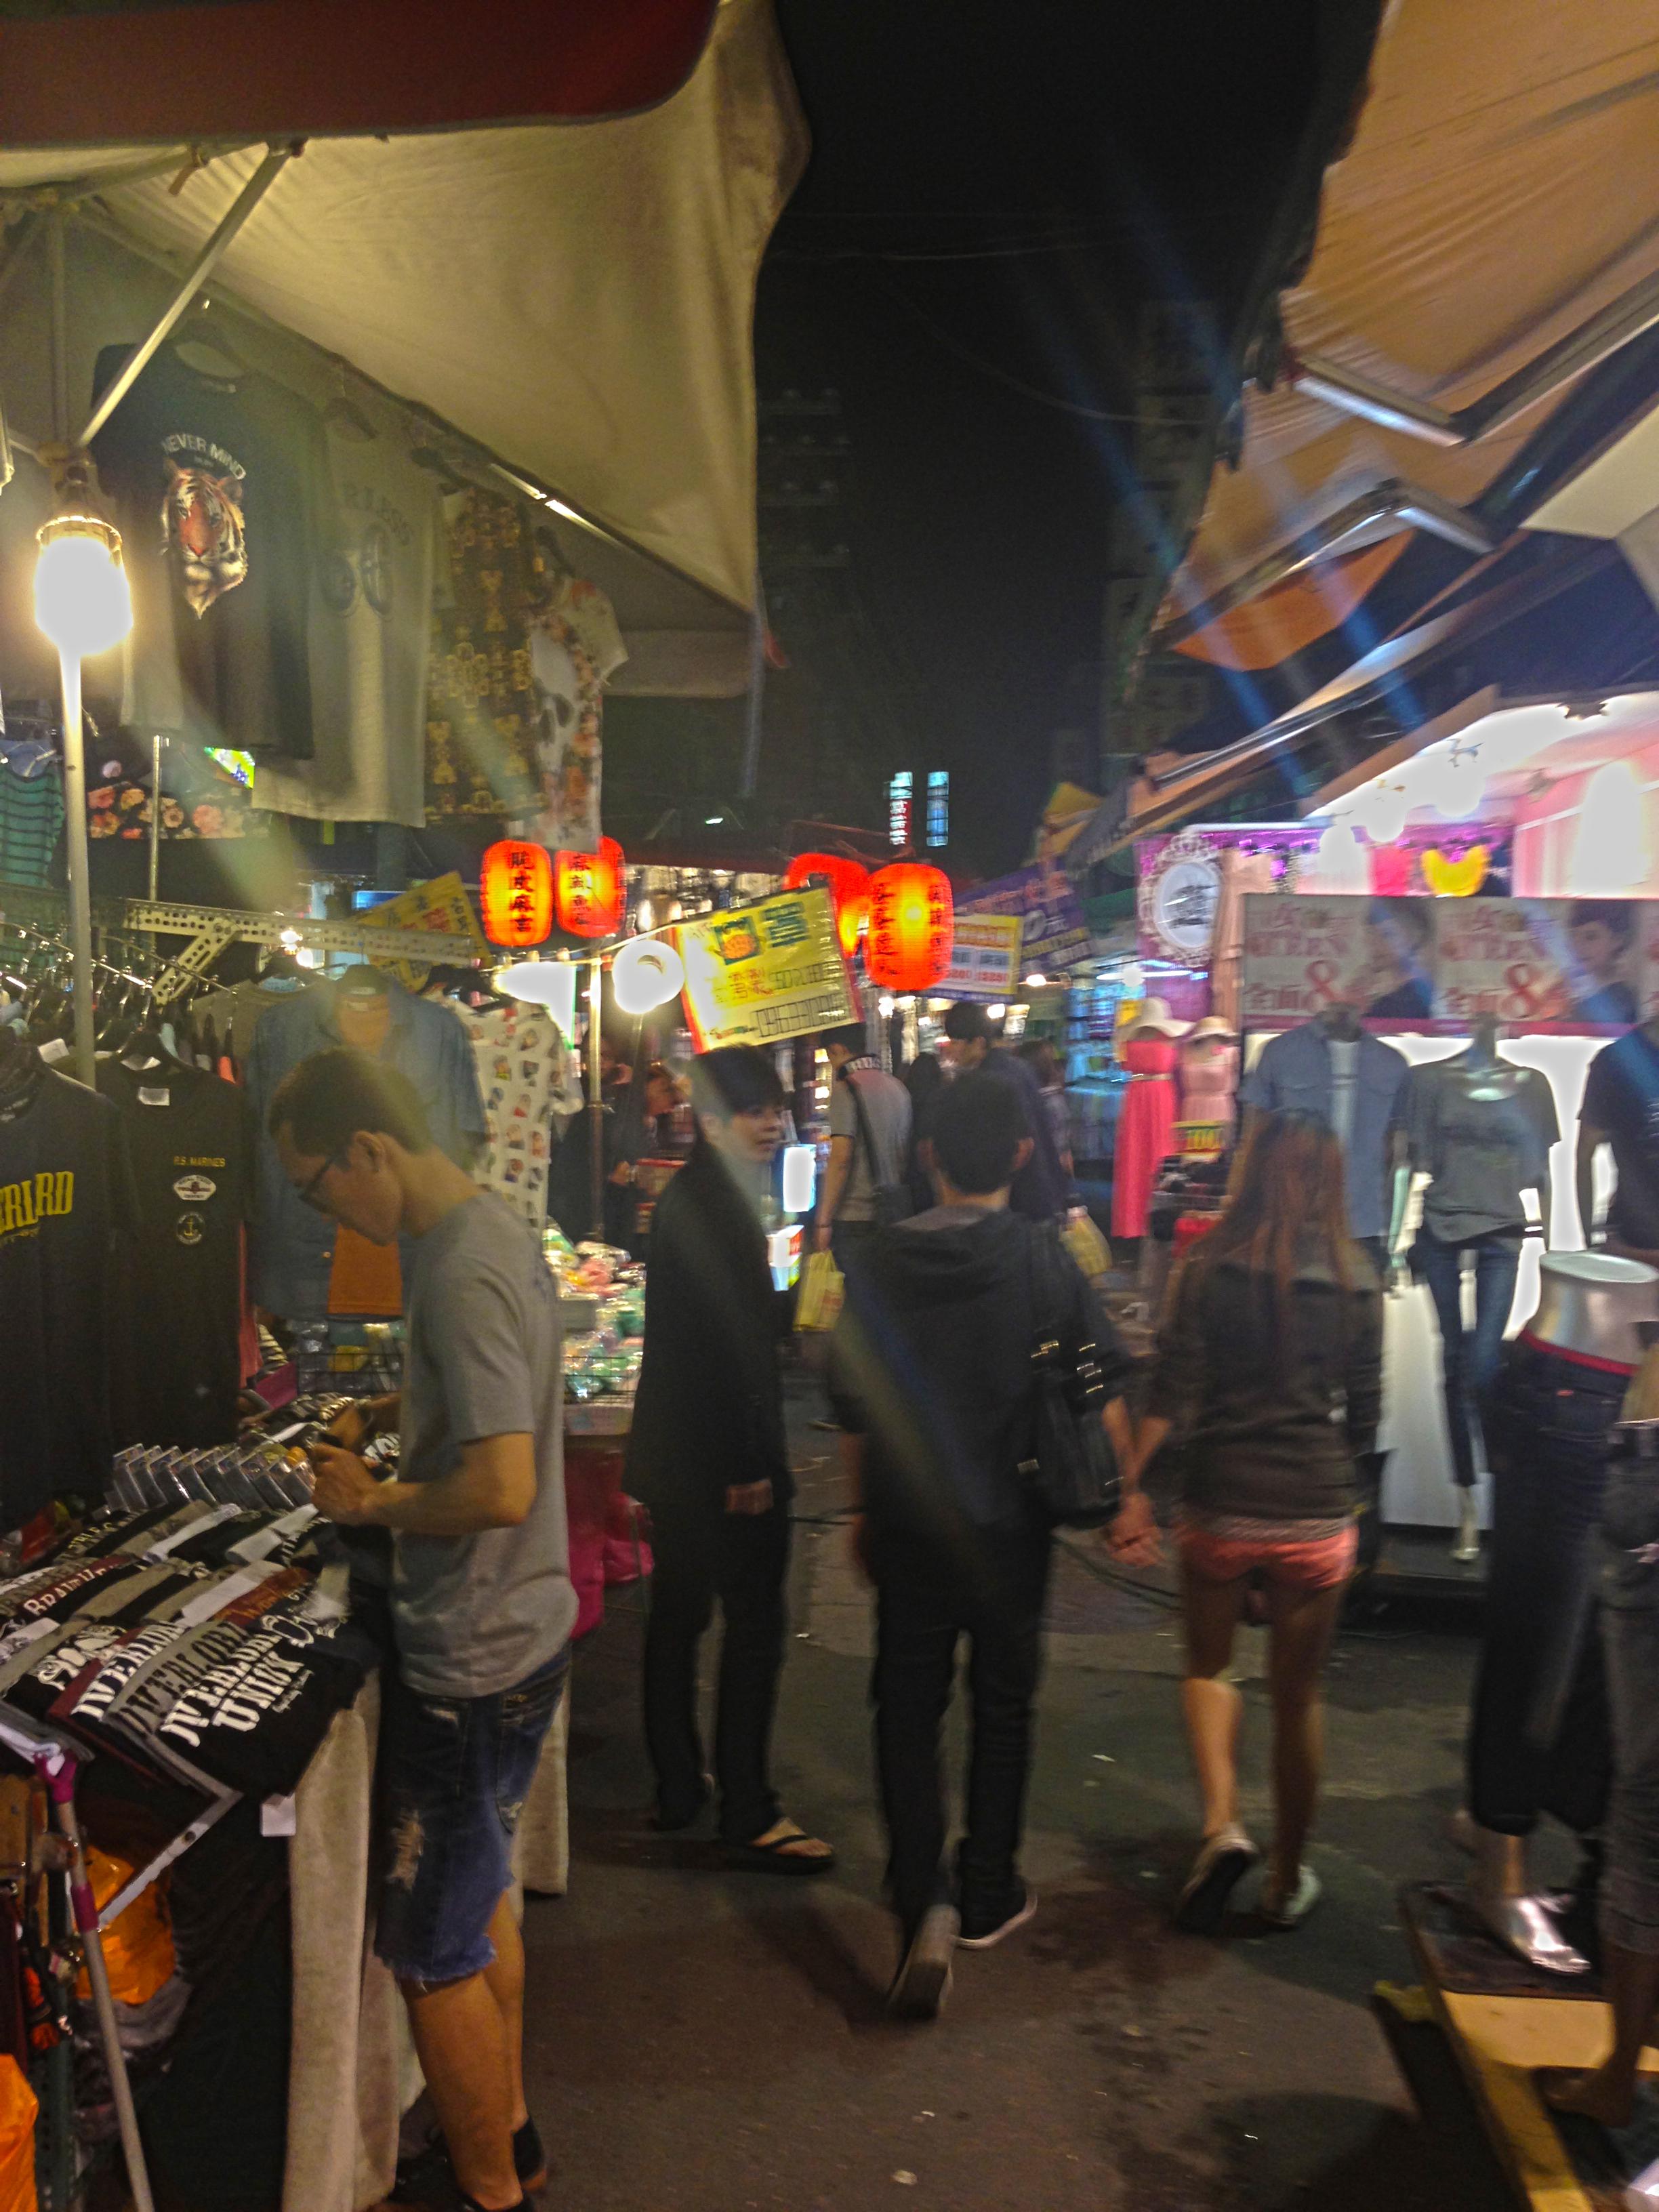  Buy Hookers in Tainan (TW)